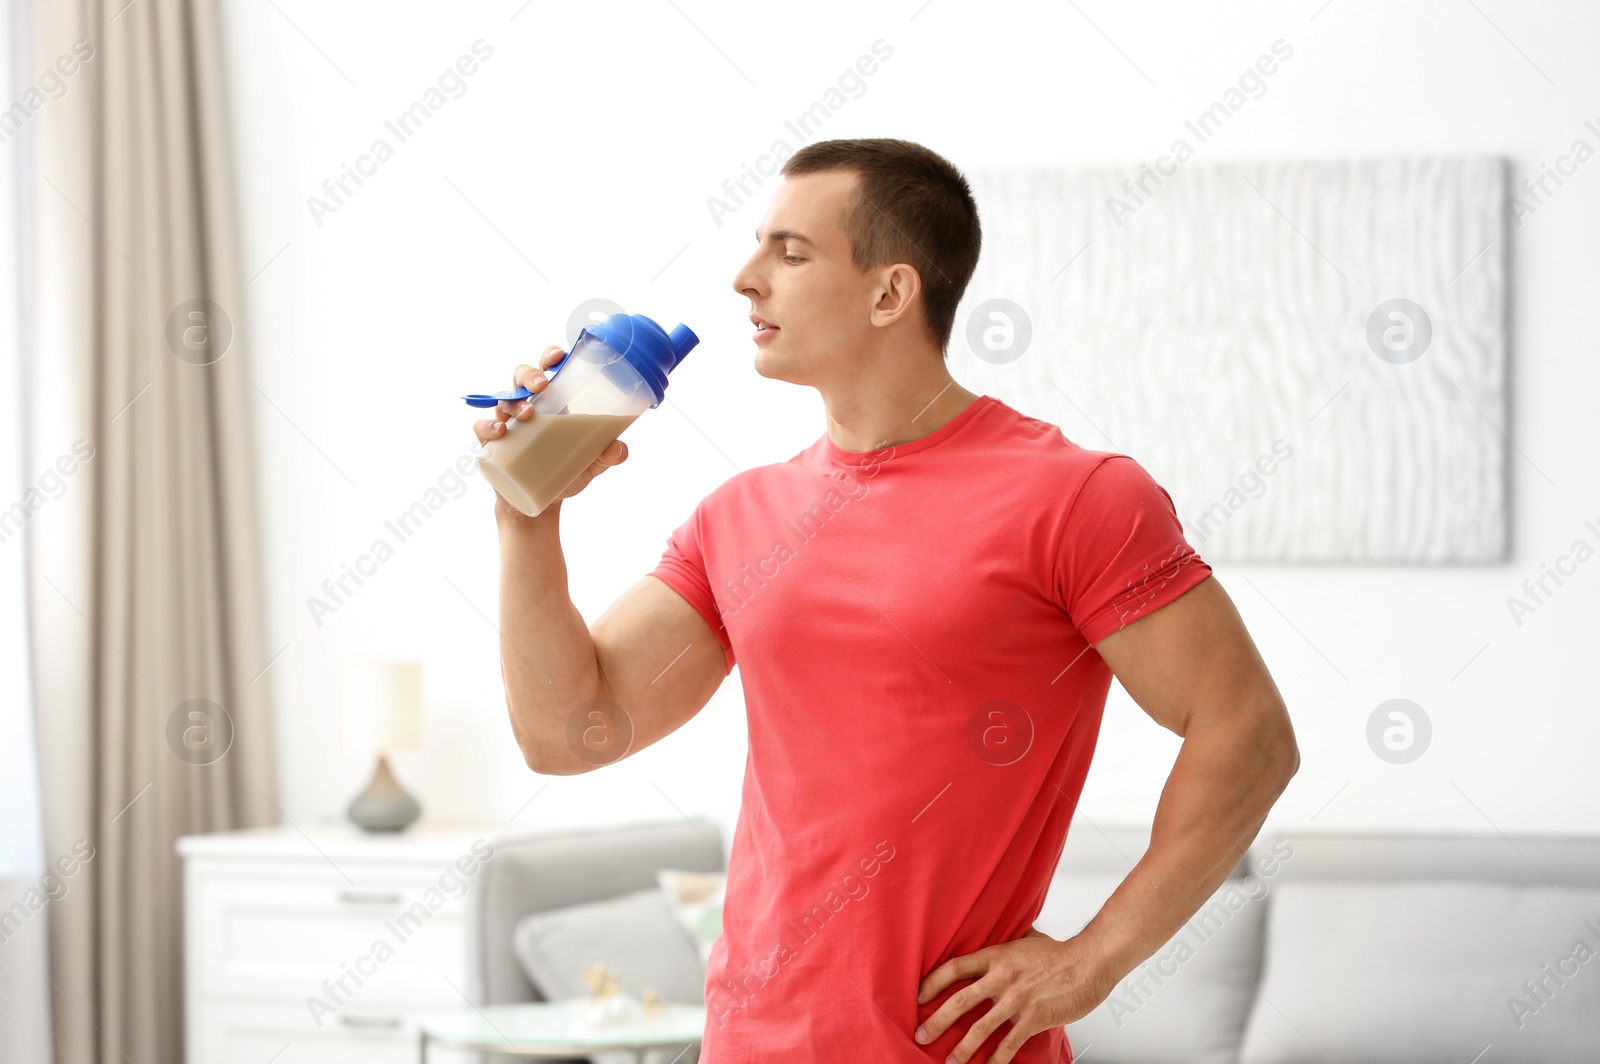 Photo of Athletic young man drinking protein shake at home